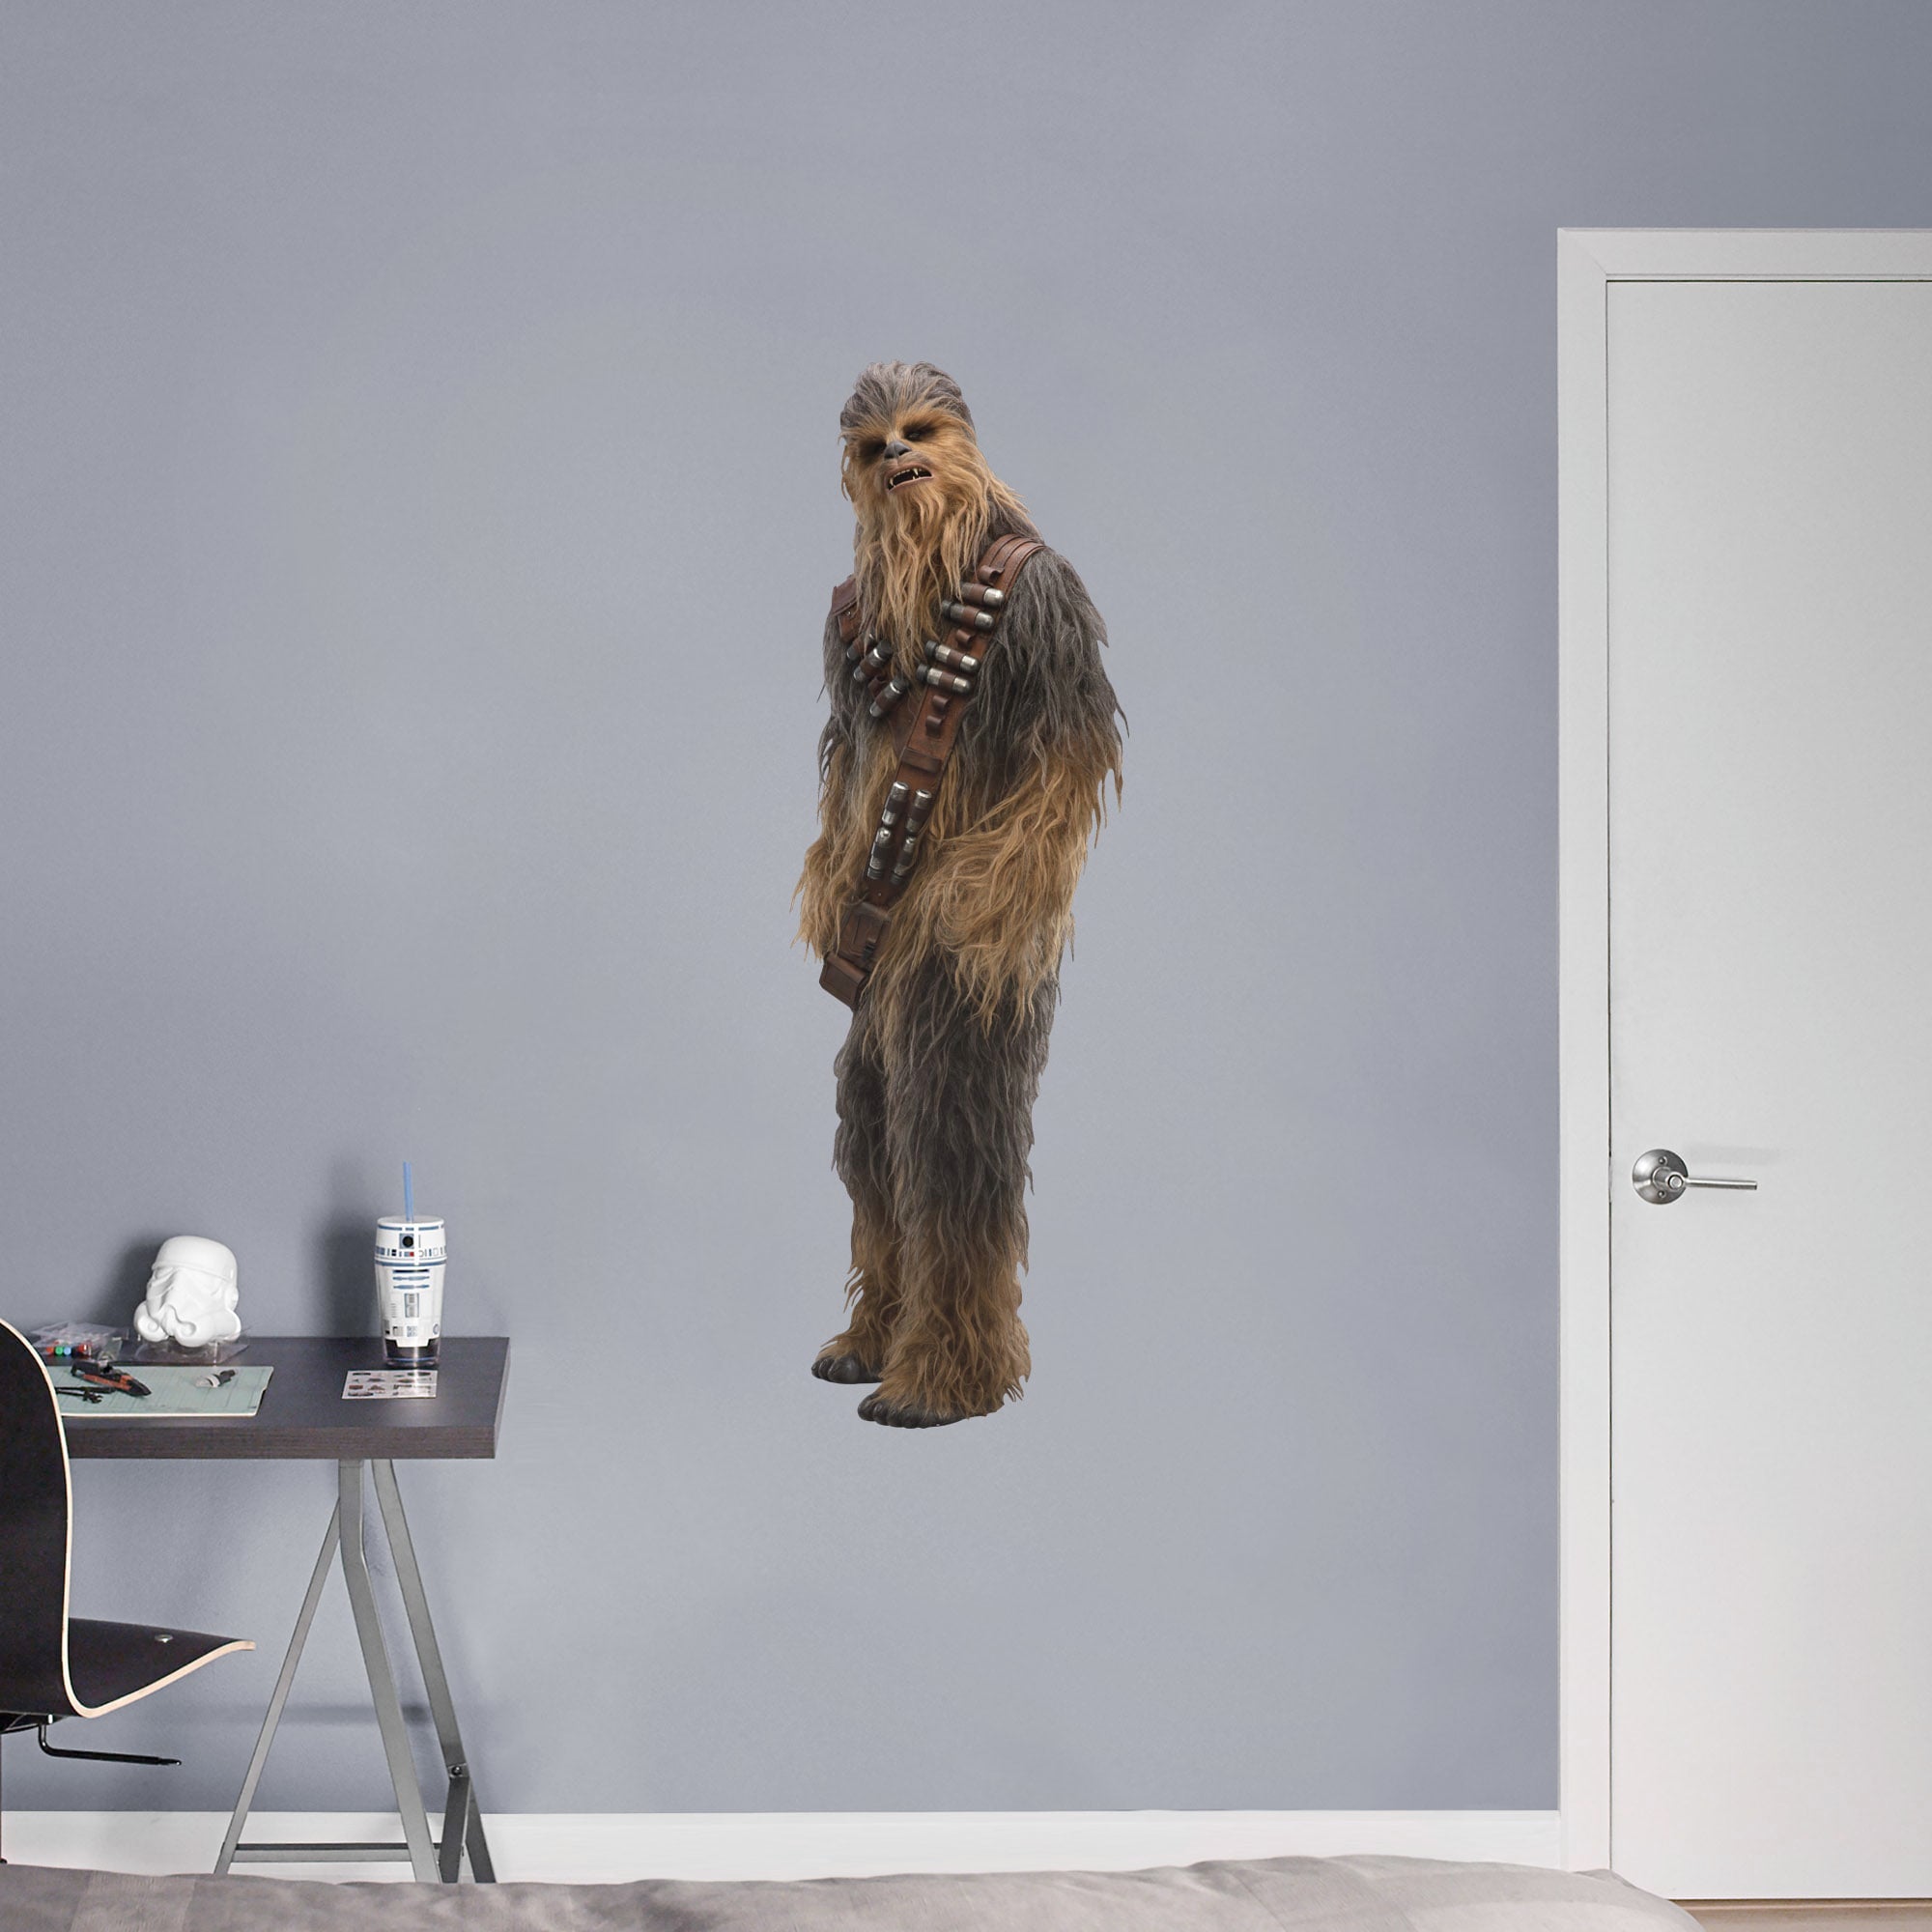 Chewbacca - Solo: A Star Wars Story - Officially Licensed Removable Wall Decal Giant Character + 2 Decals (16"W x 51"H) by Fathe